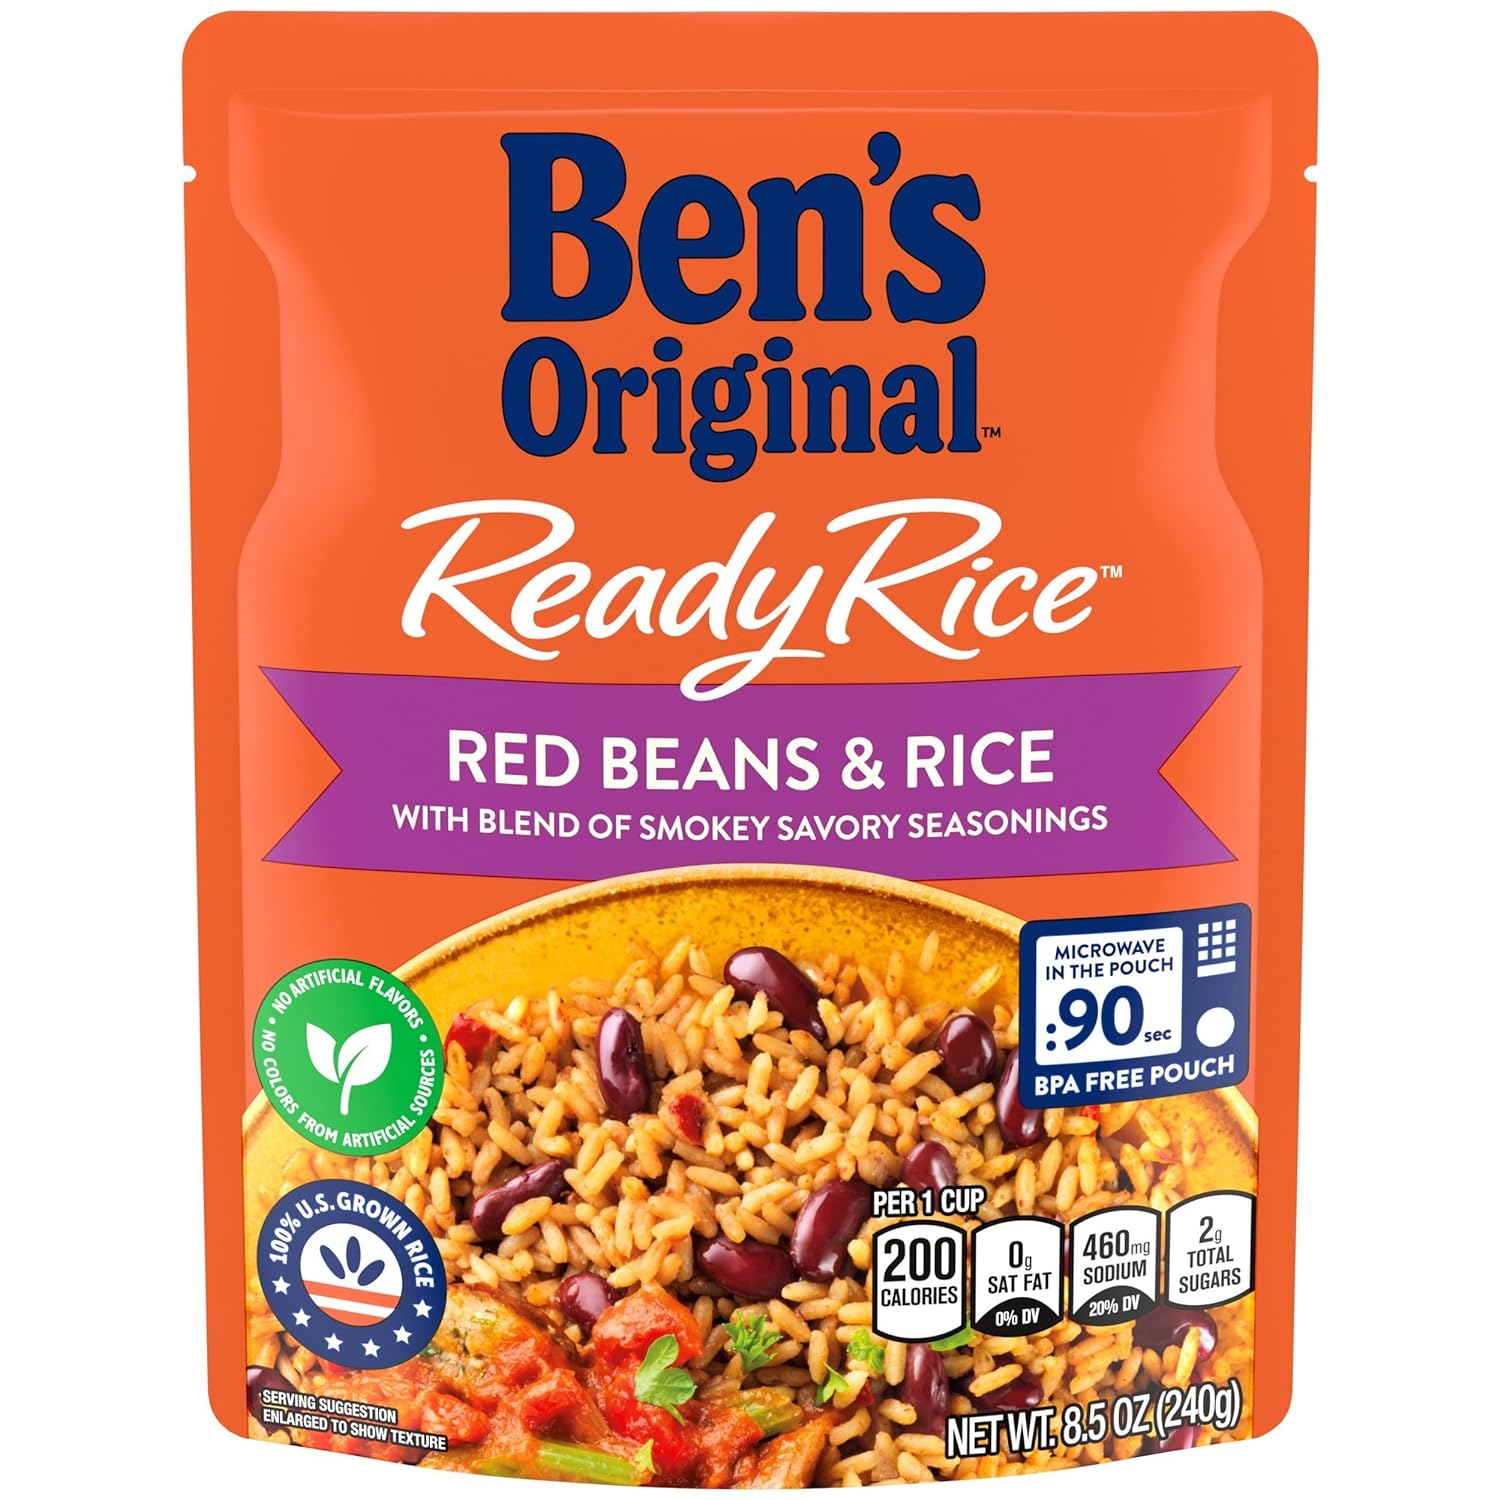 BEN'S ORIGINAL Ready Rice Red Beans and Rice, Easy Flavored Rice Dinner Side, 8.5 oz Pouch